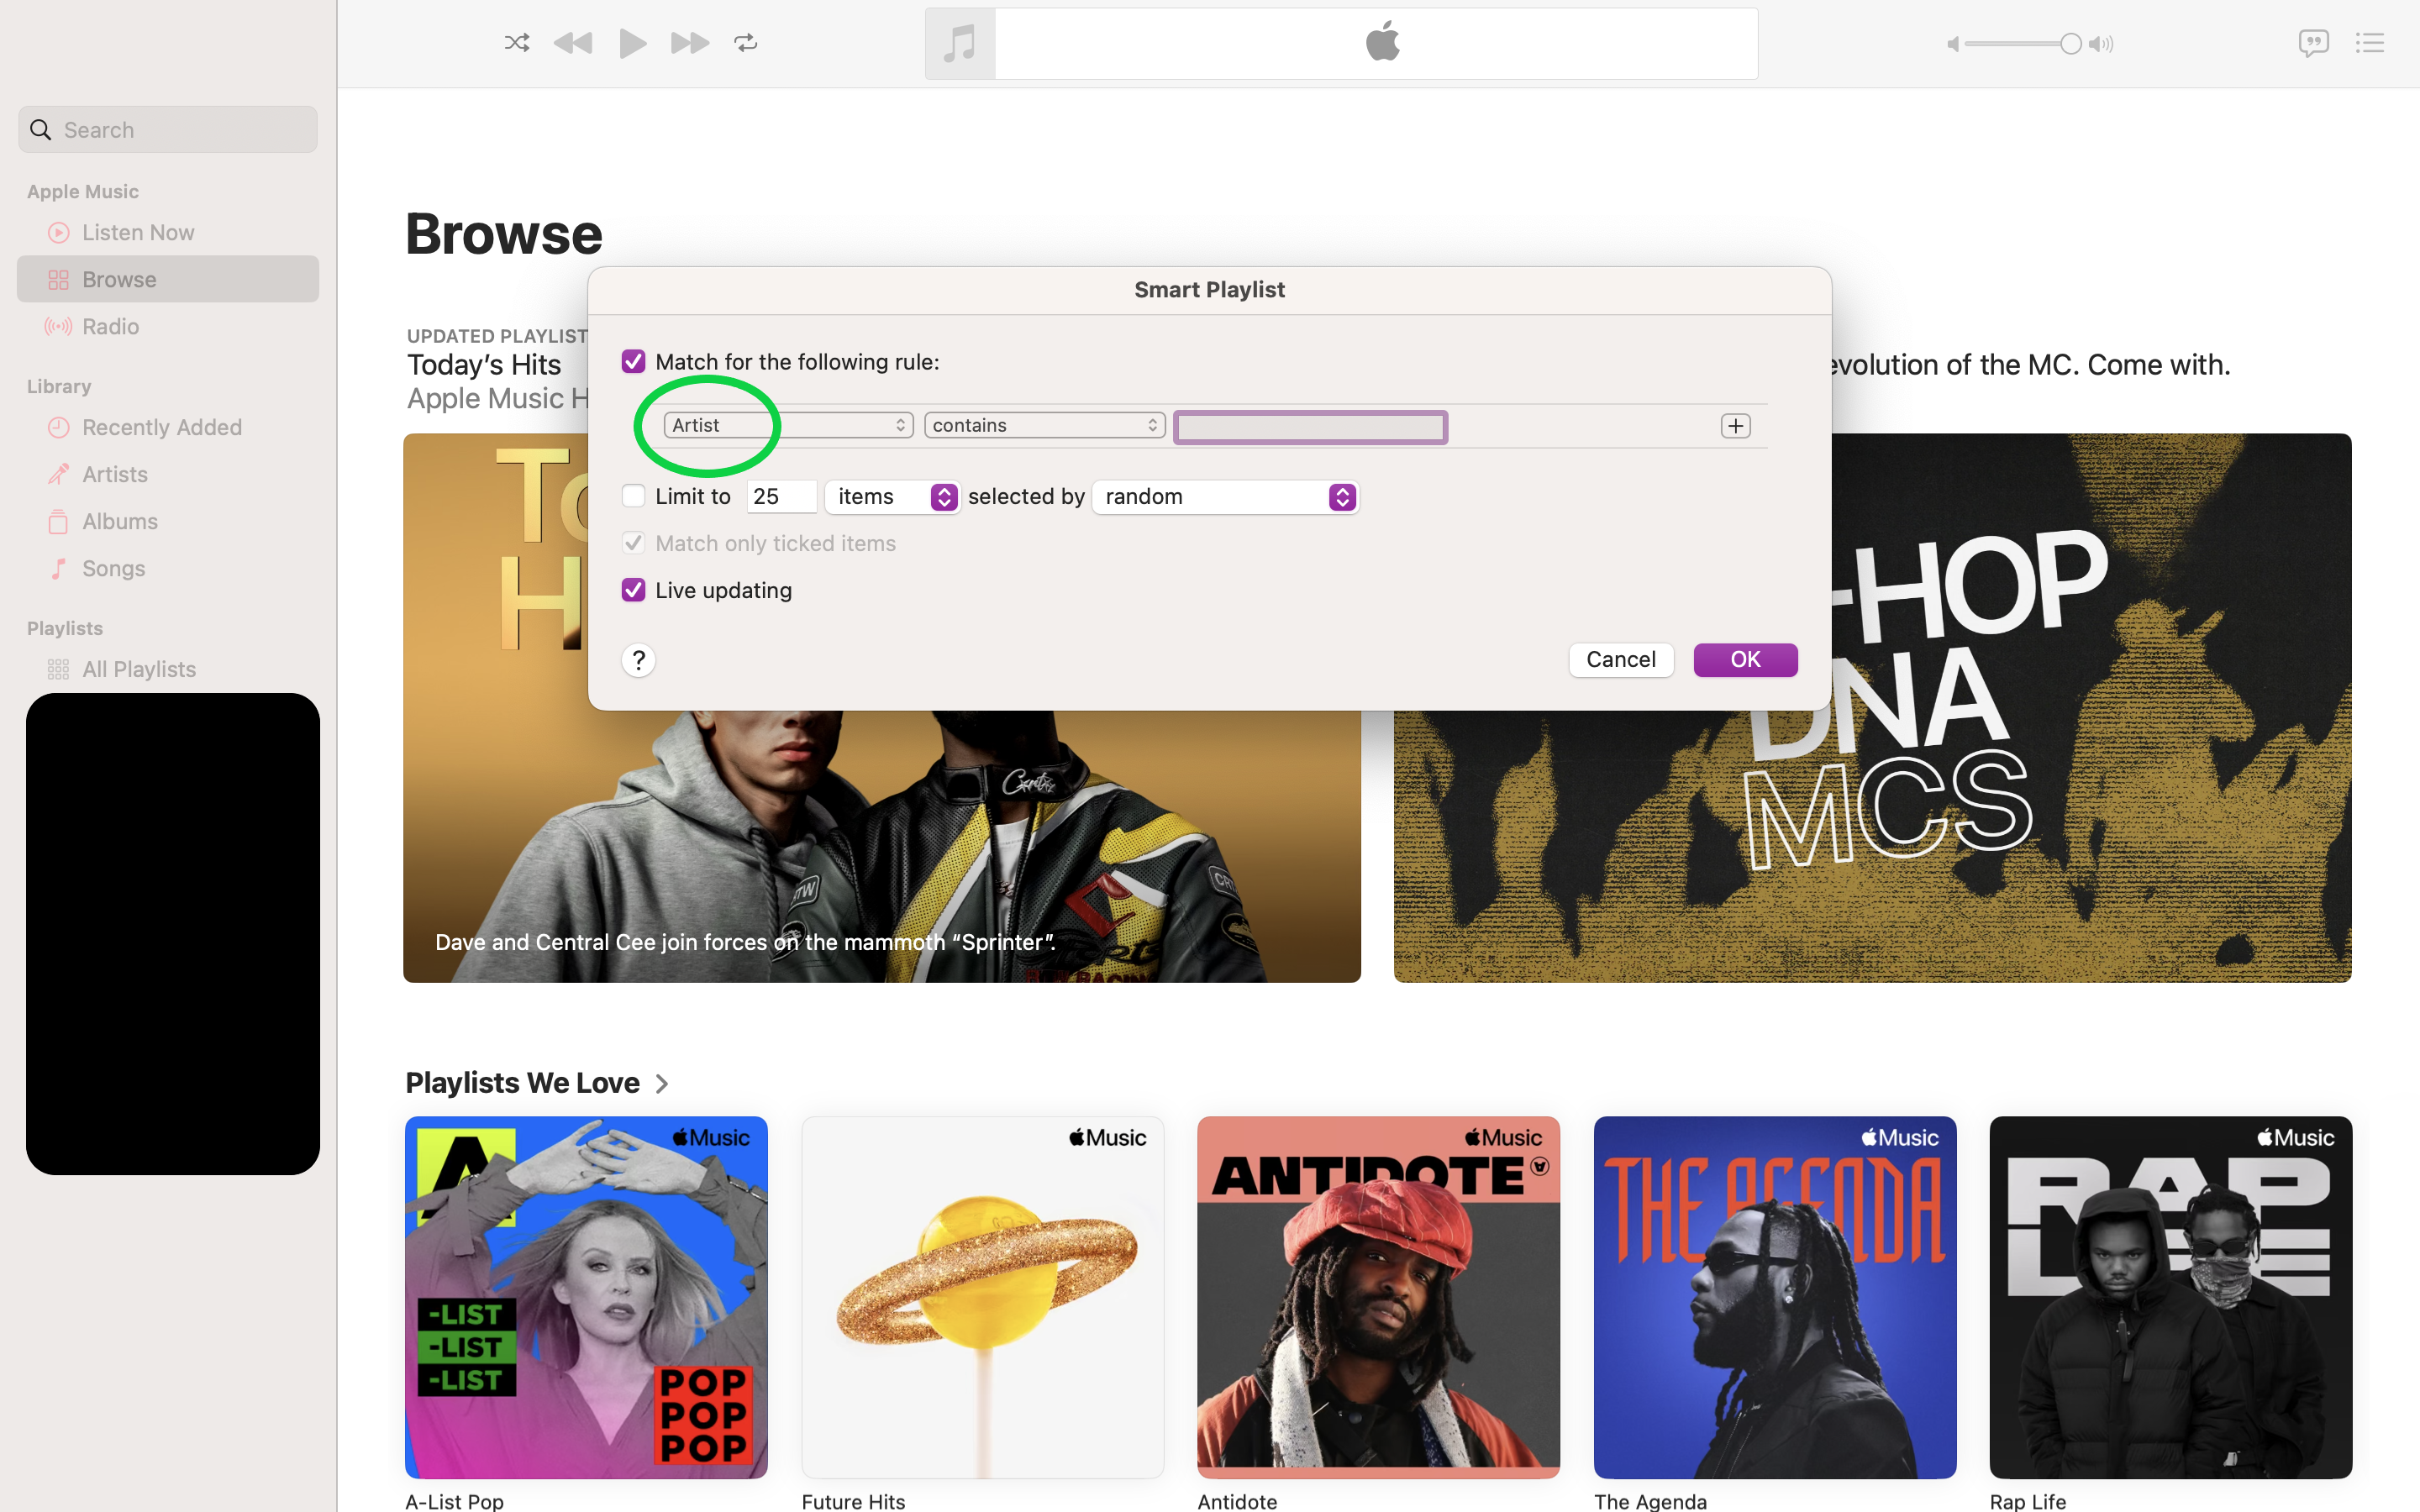 How to see loved songs on Apple Music